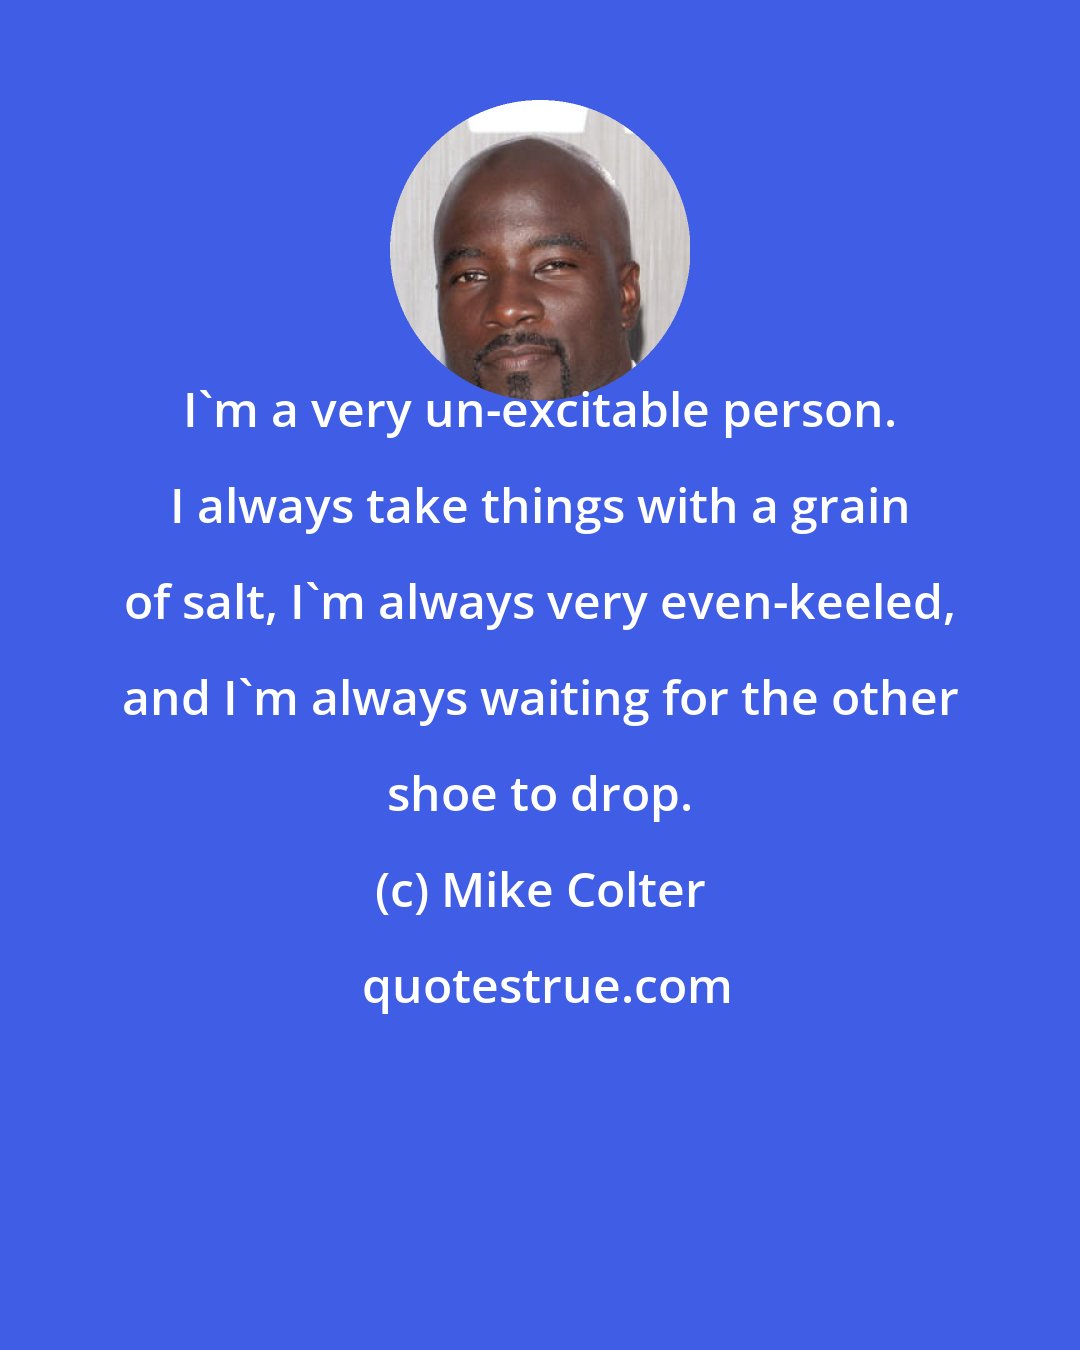 Mike Colter: I'm a very un-excitable person. I always take things with a grain of salt, I'm always very even-keeled, and I'm always waiting for the other shoe to drop.